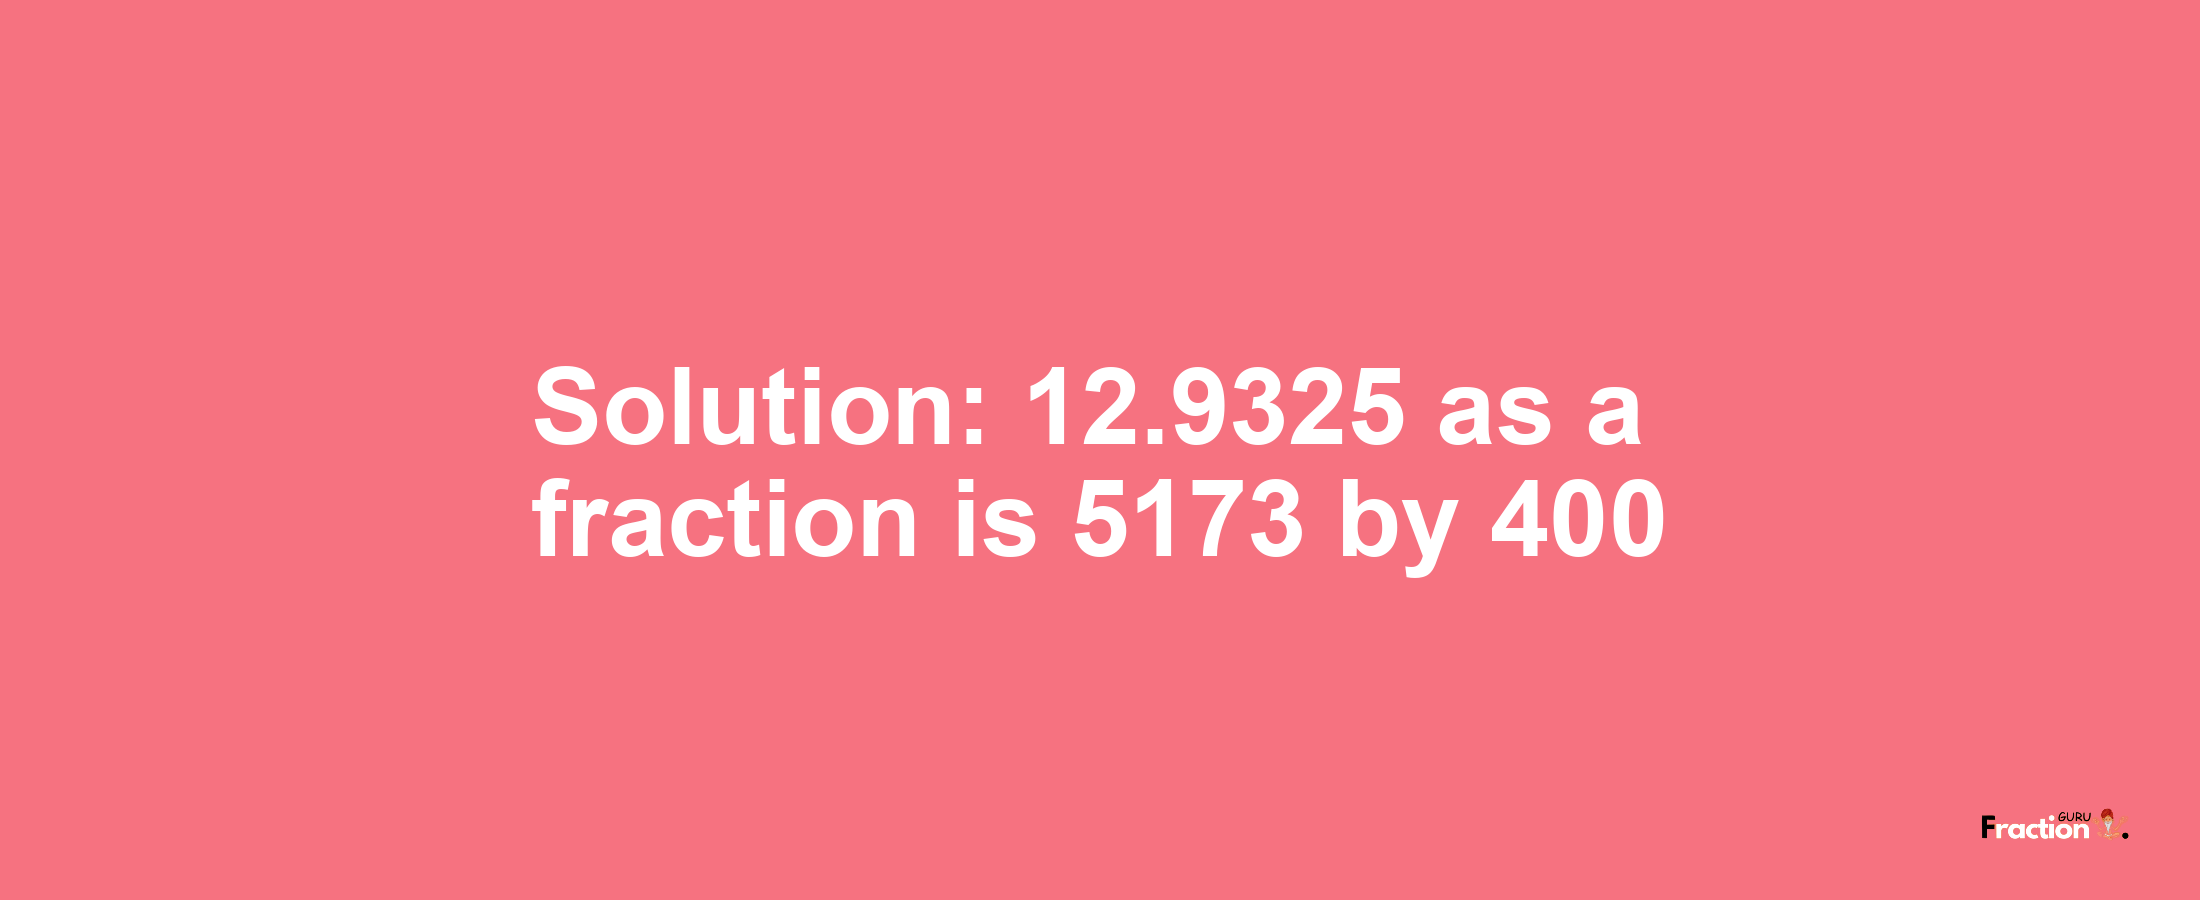 Solution:12.9325 as a fraction is 5173/400